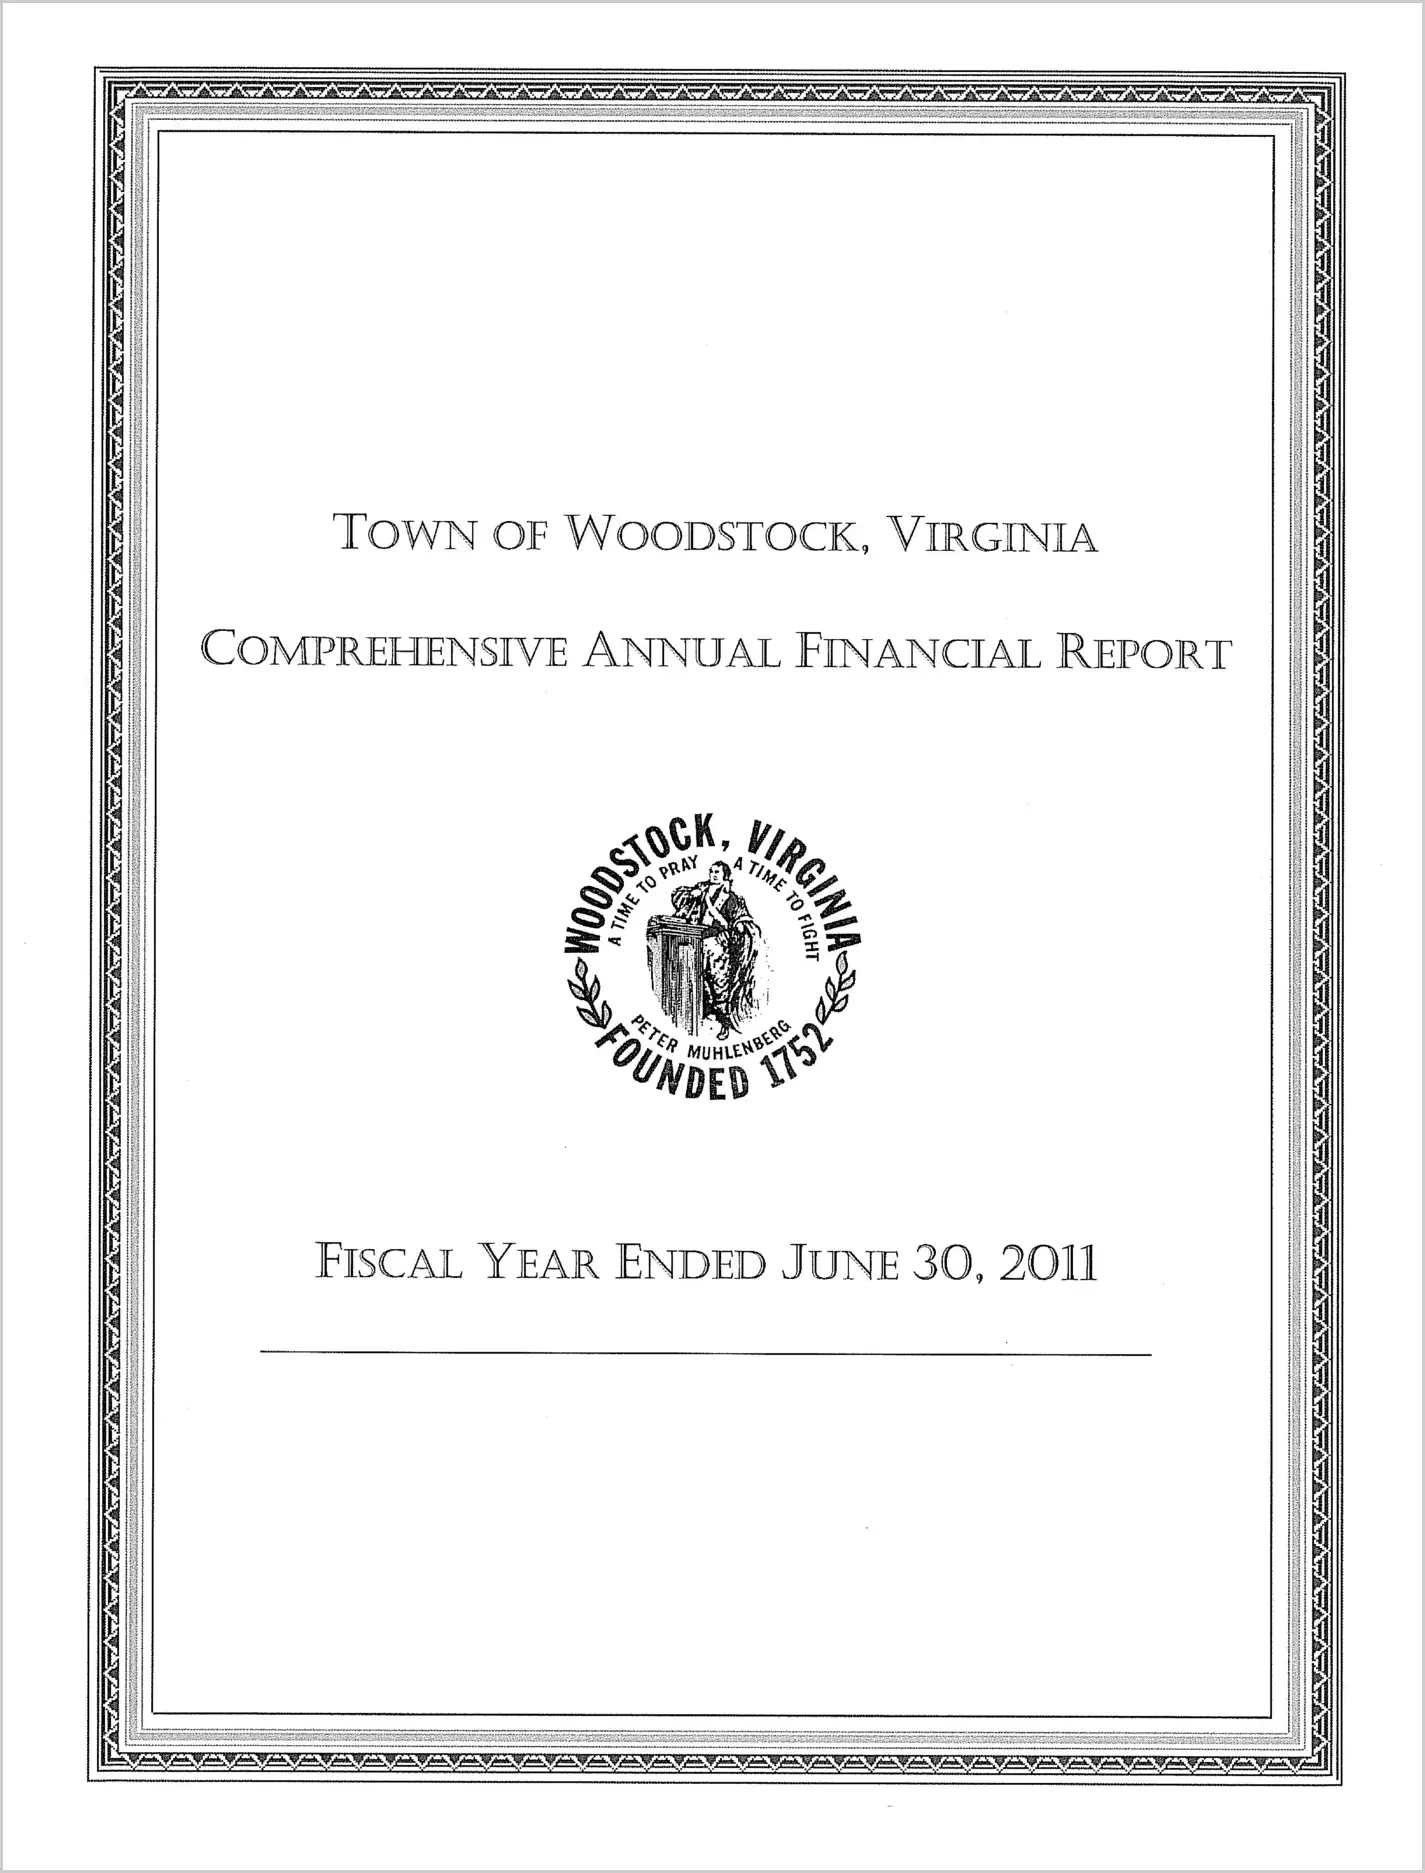 2011 Annual Financial Report for Town of Woodstock